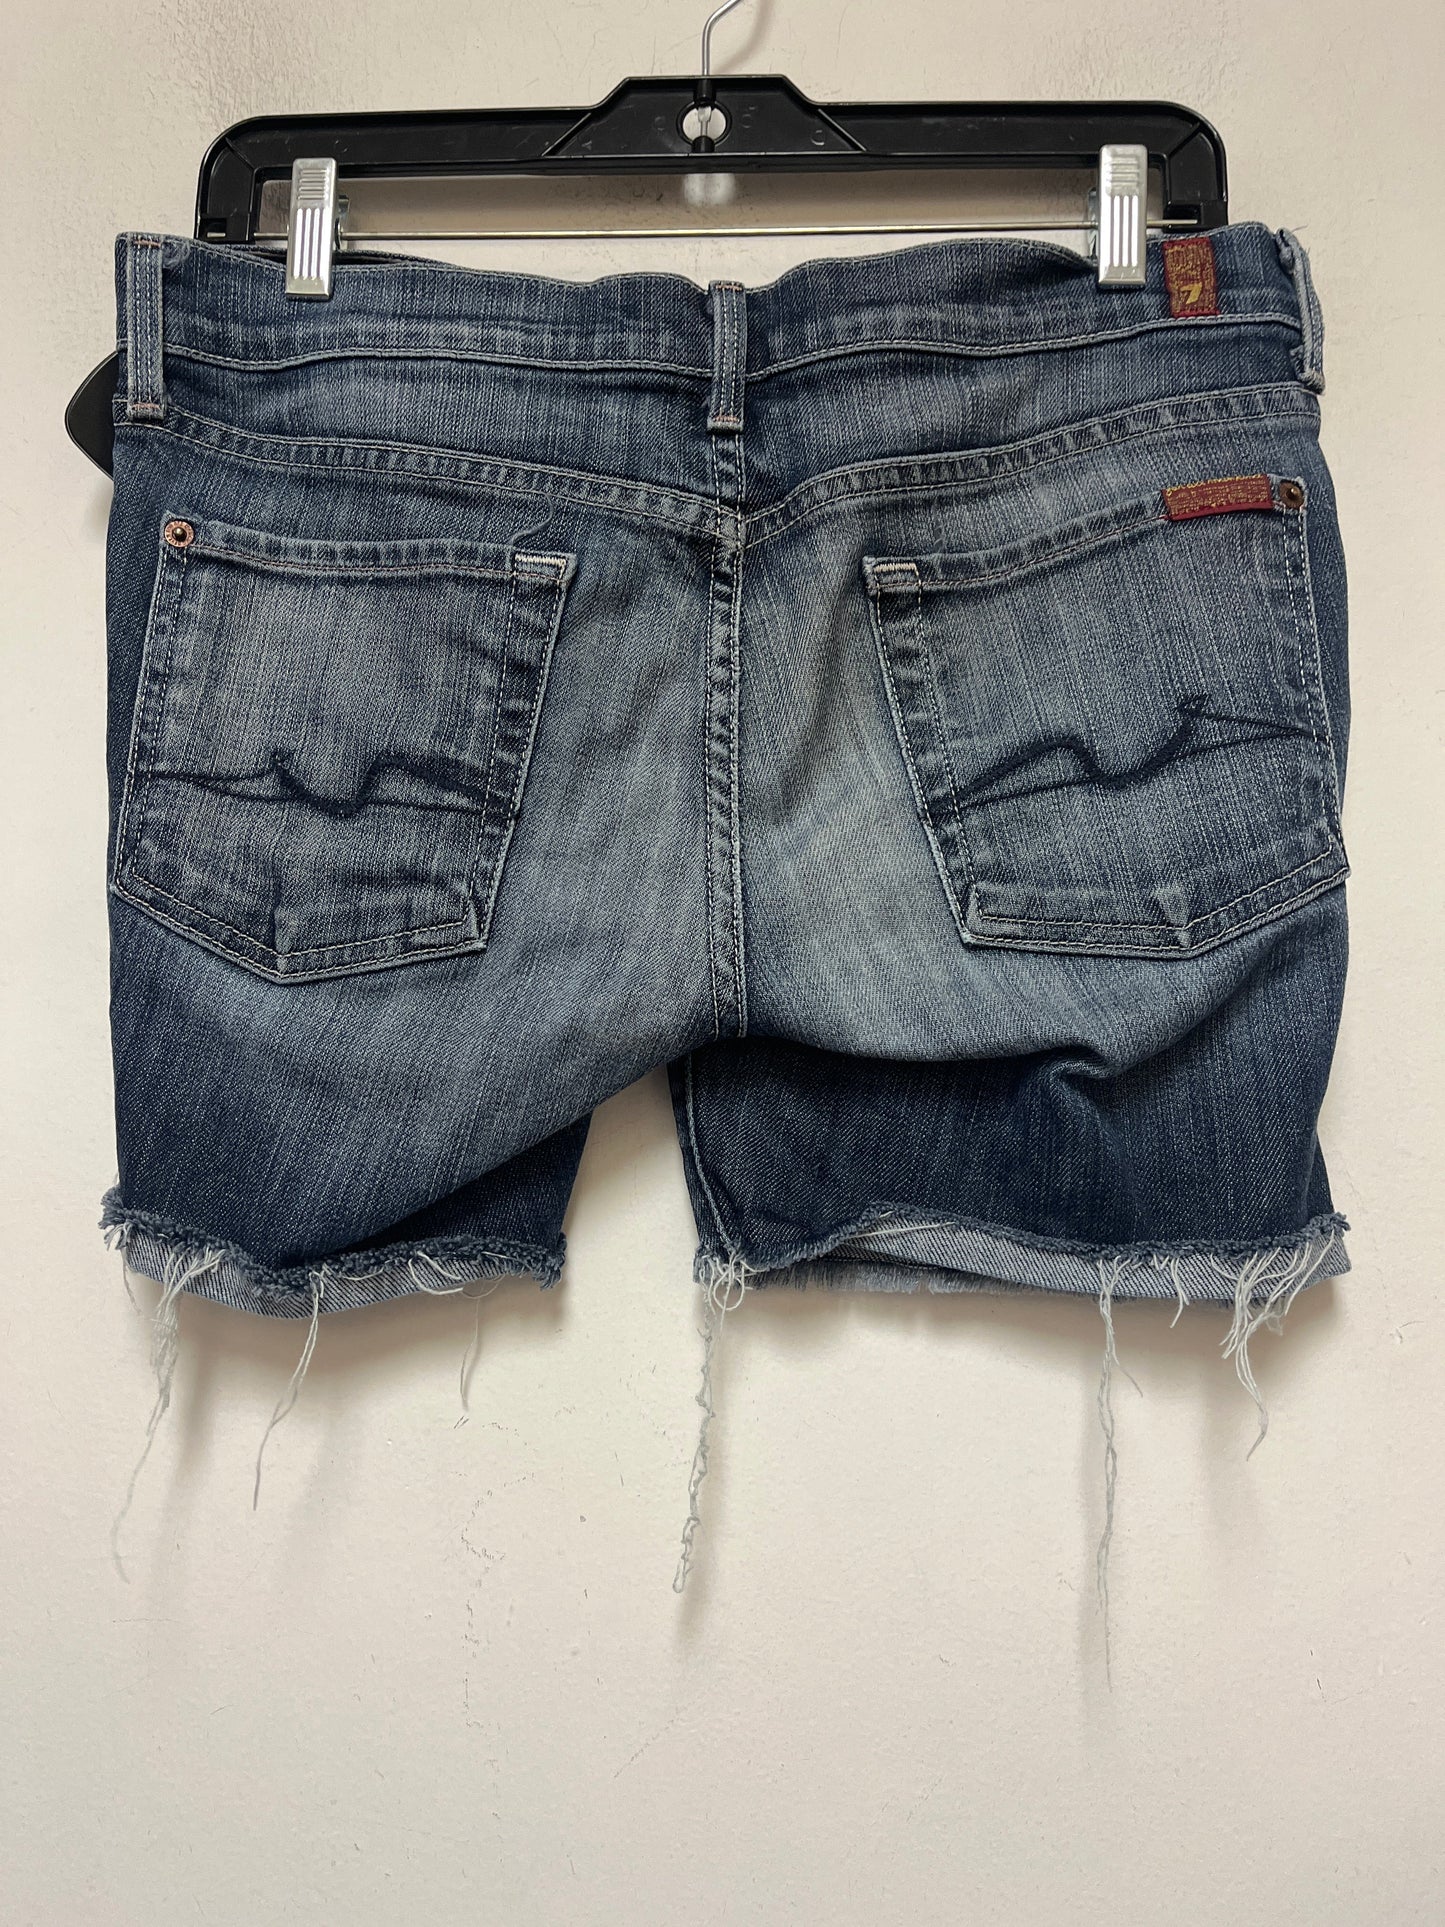 Blue Denim Shorts 7 For All Mankind, Size 8